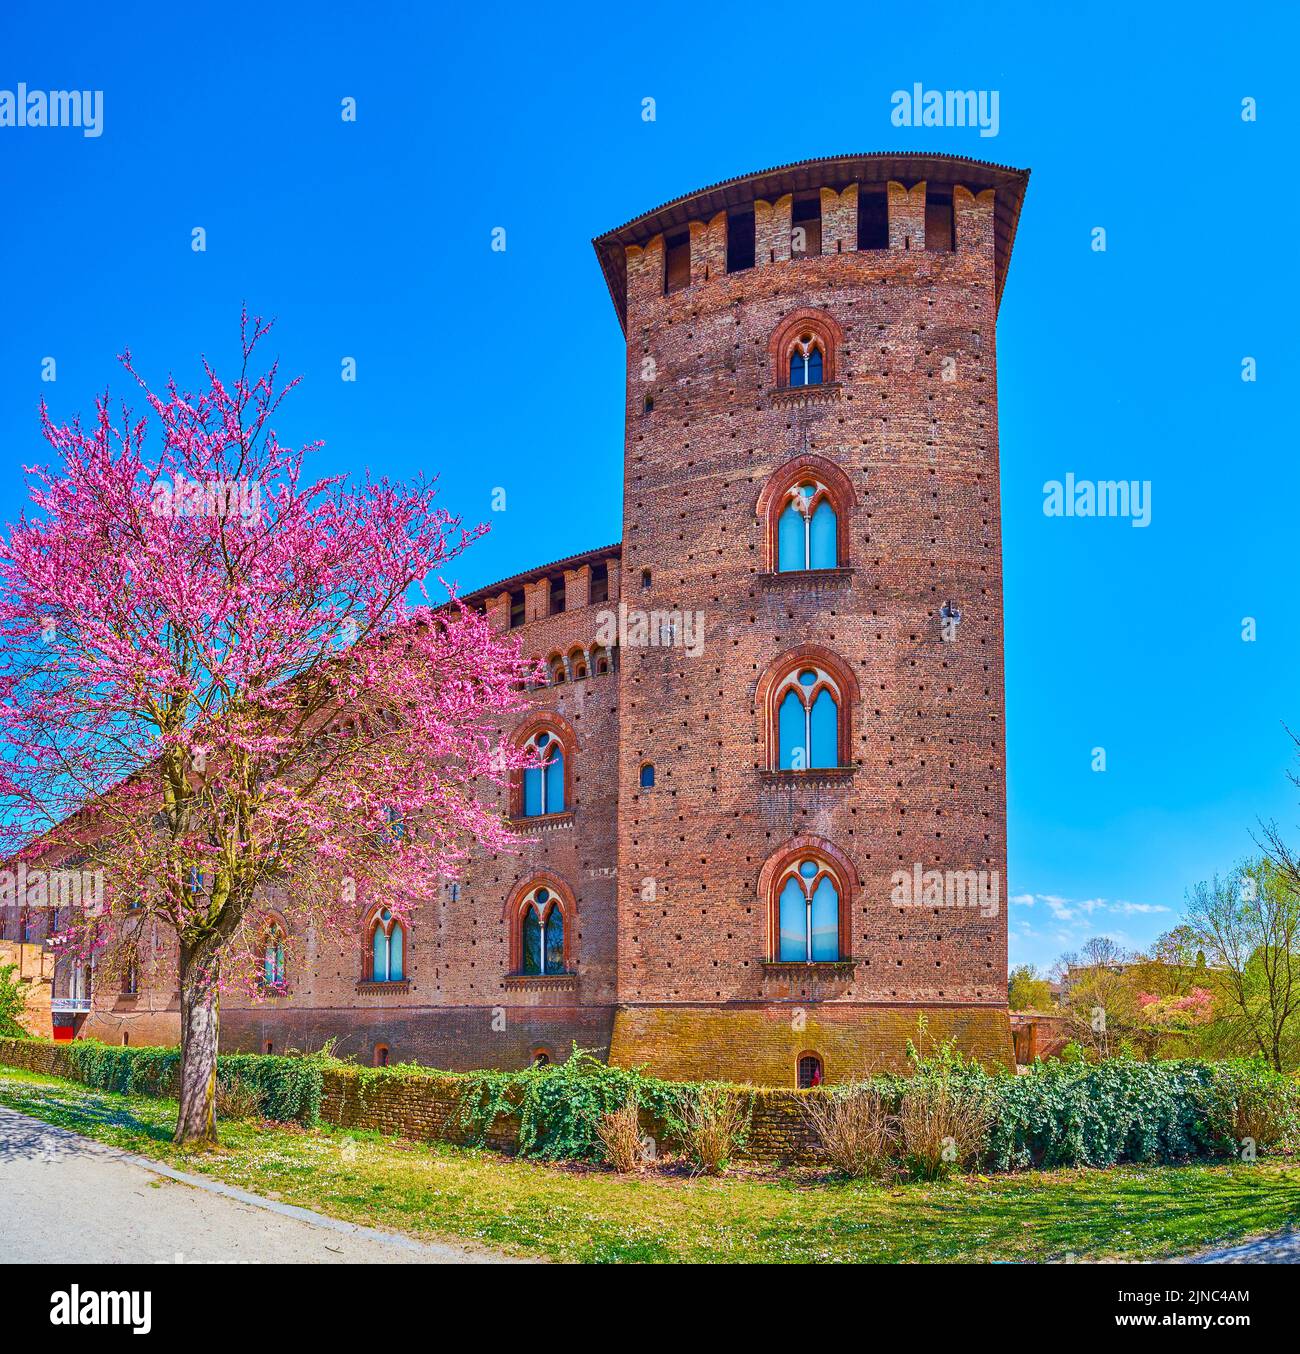 Medieval Visconti Castle and blooming Cornus Florida trees in its park, Pavia, Italy Stock Photo